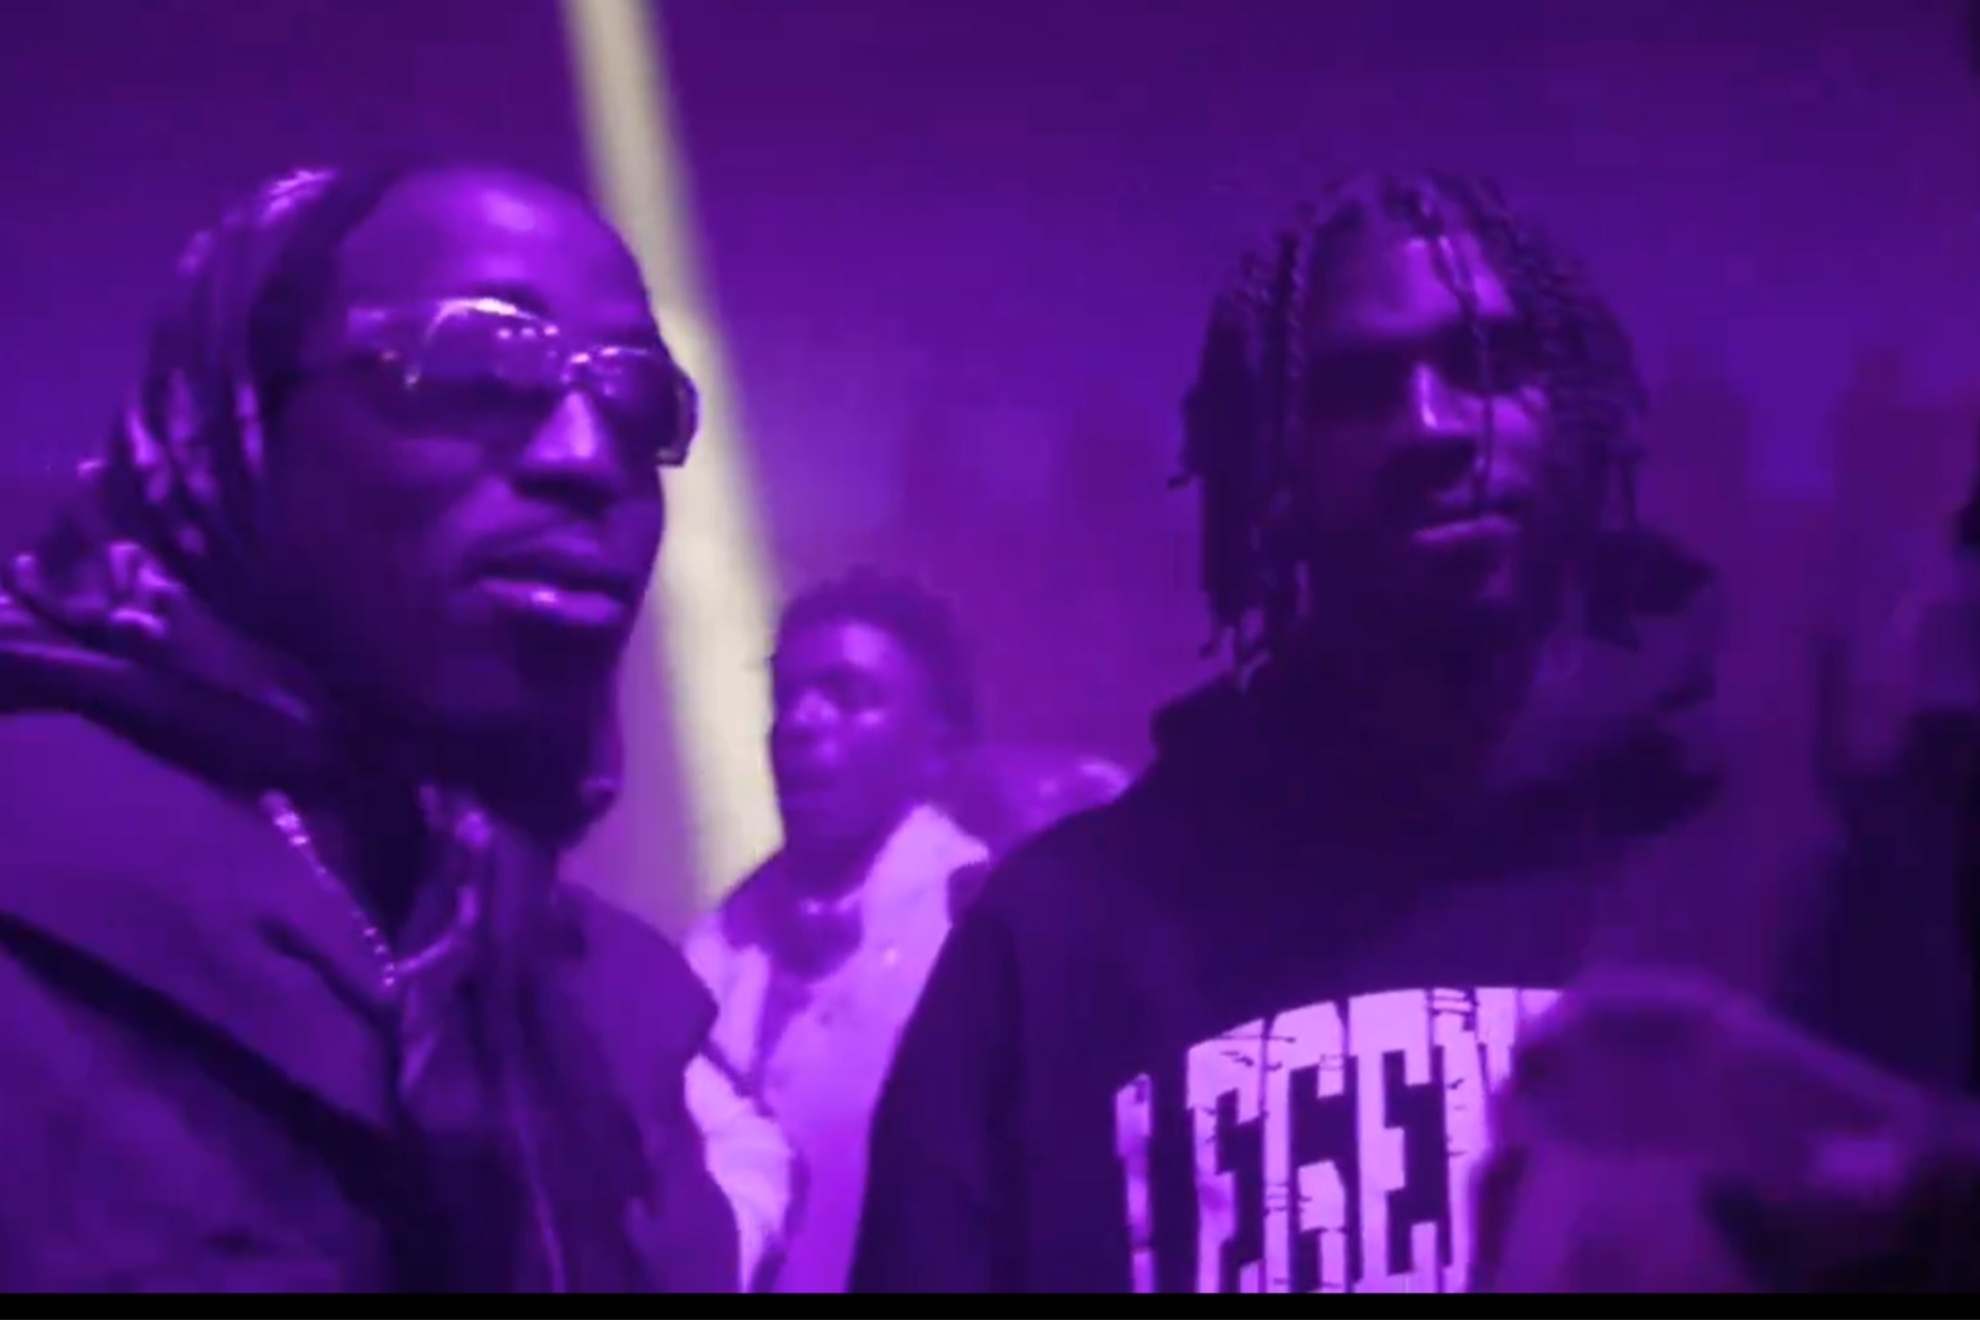 Quavo joined the Sanders brothers at a Parisian night club